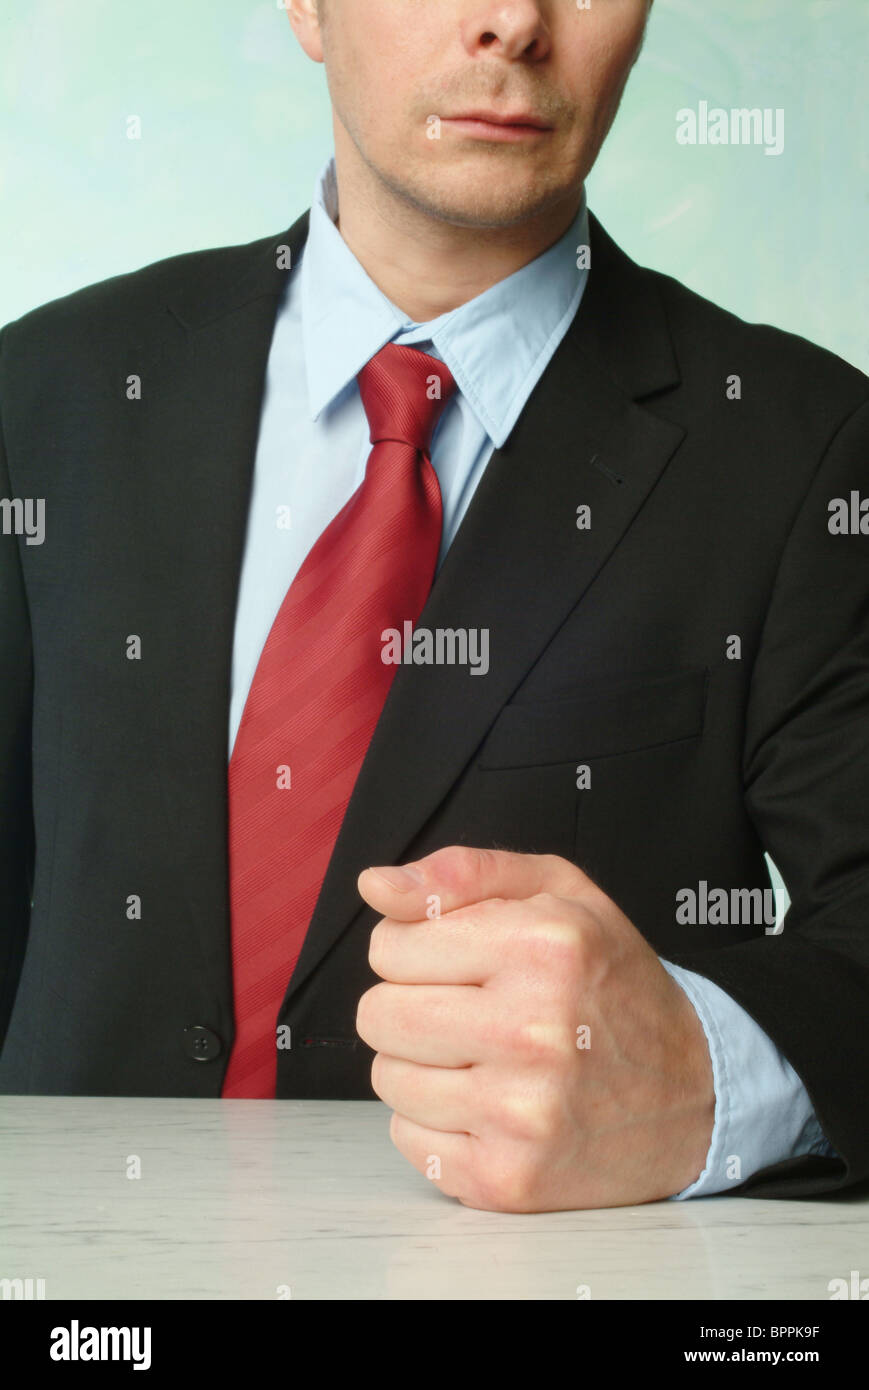 Man in a suit banging his fist on a table Stock Photo